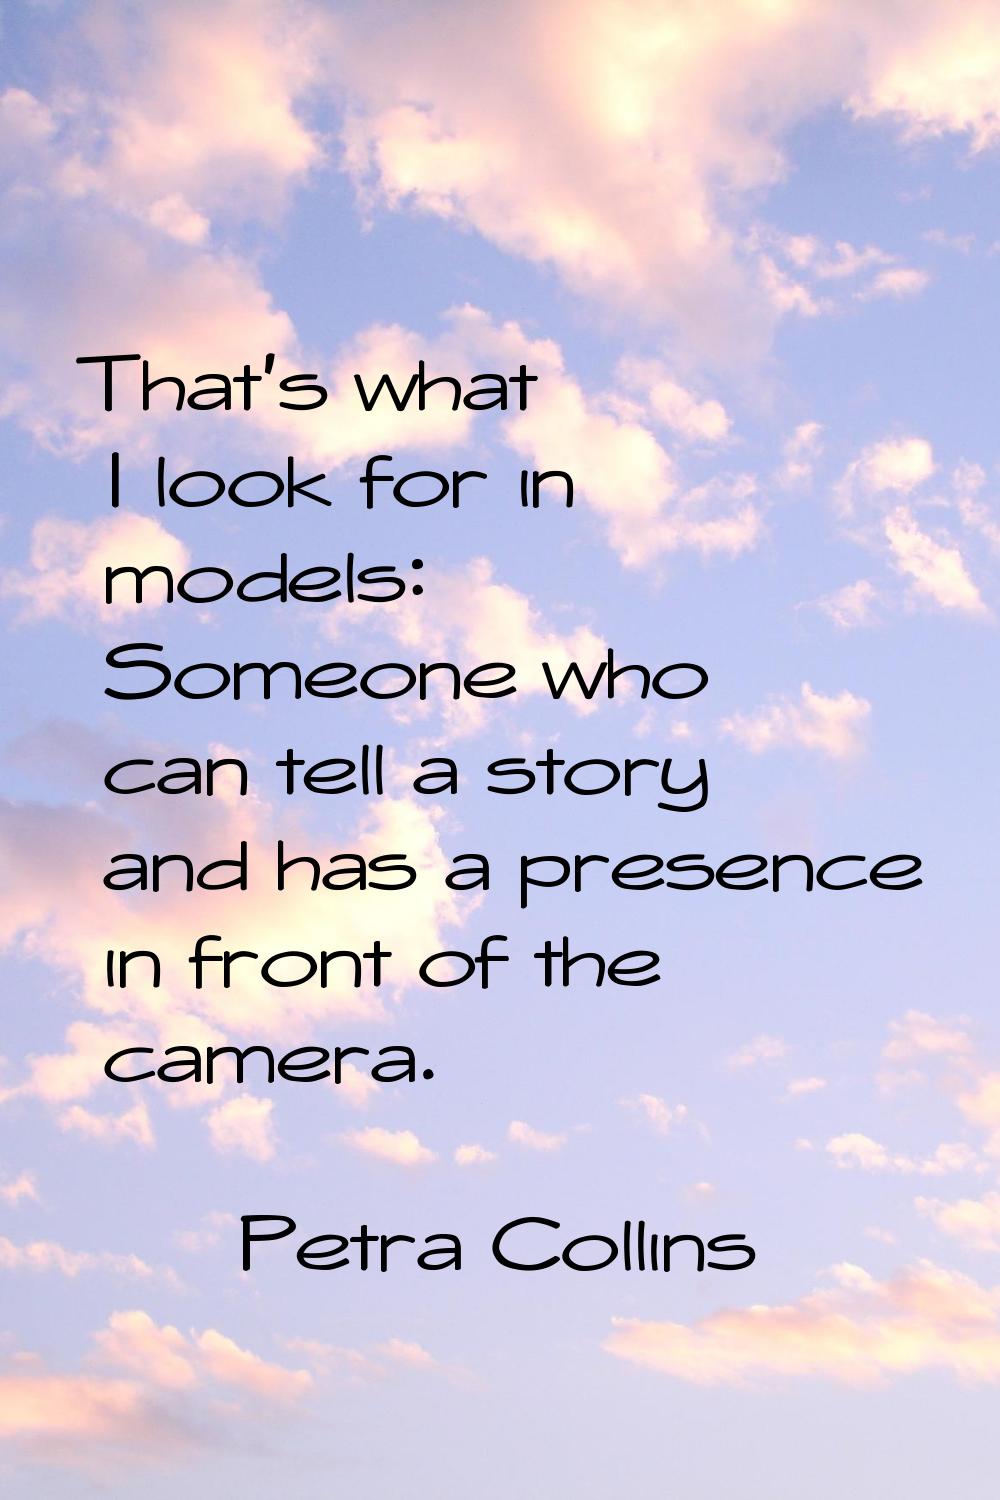 That's what I look for in models: Someone who can tell a story and has a presence in front of the c